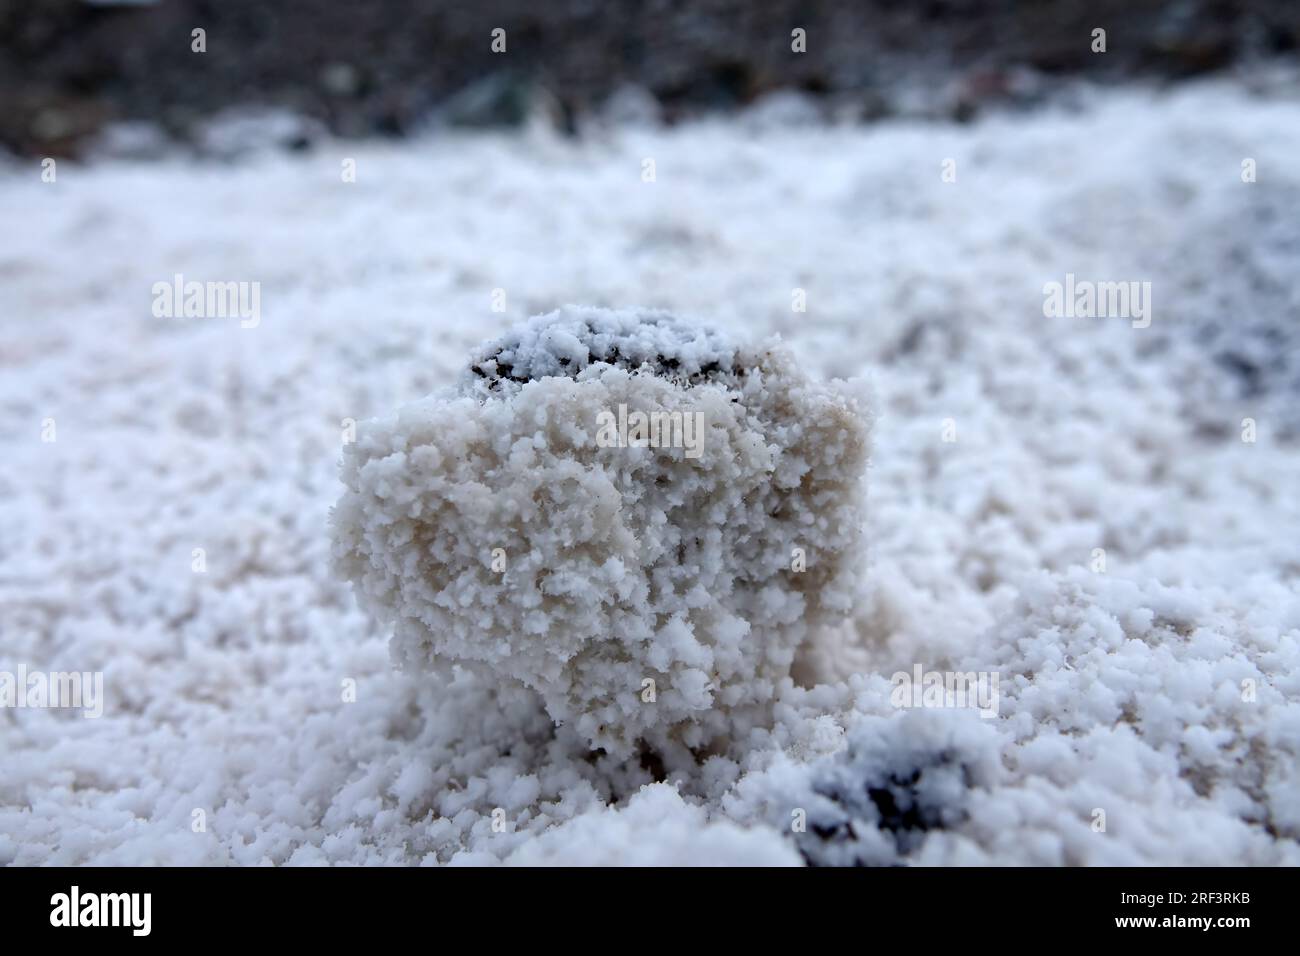 Geology and Geochemistry. Saline land, limestone evaporite, gypsum dropped from supersaturated solutions, Anhydrite - calcium sulfate, solidification. Stock Photo